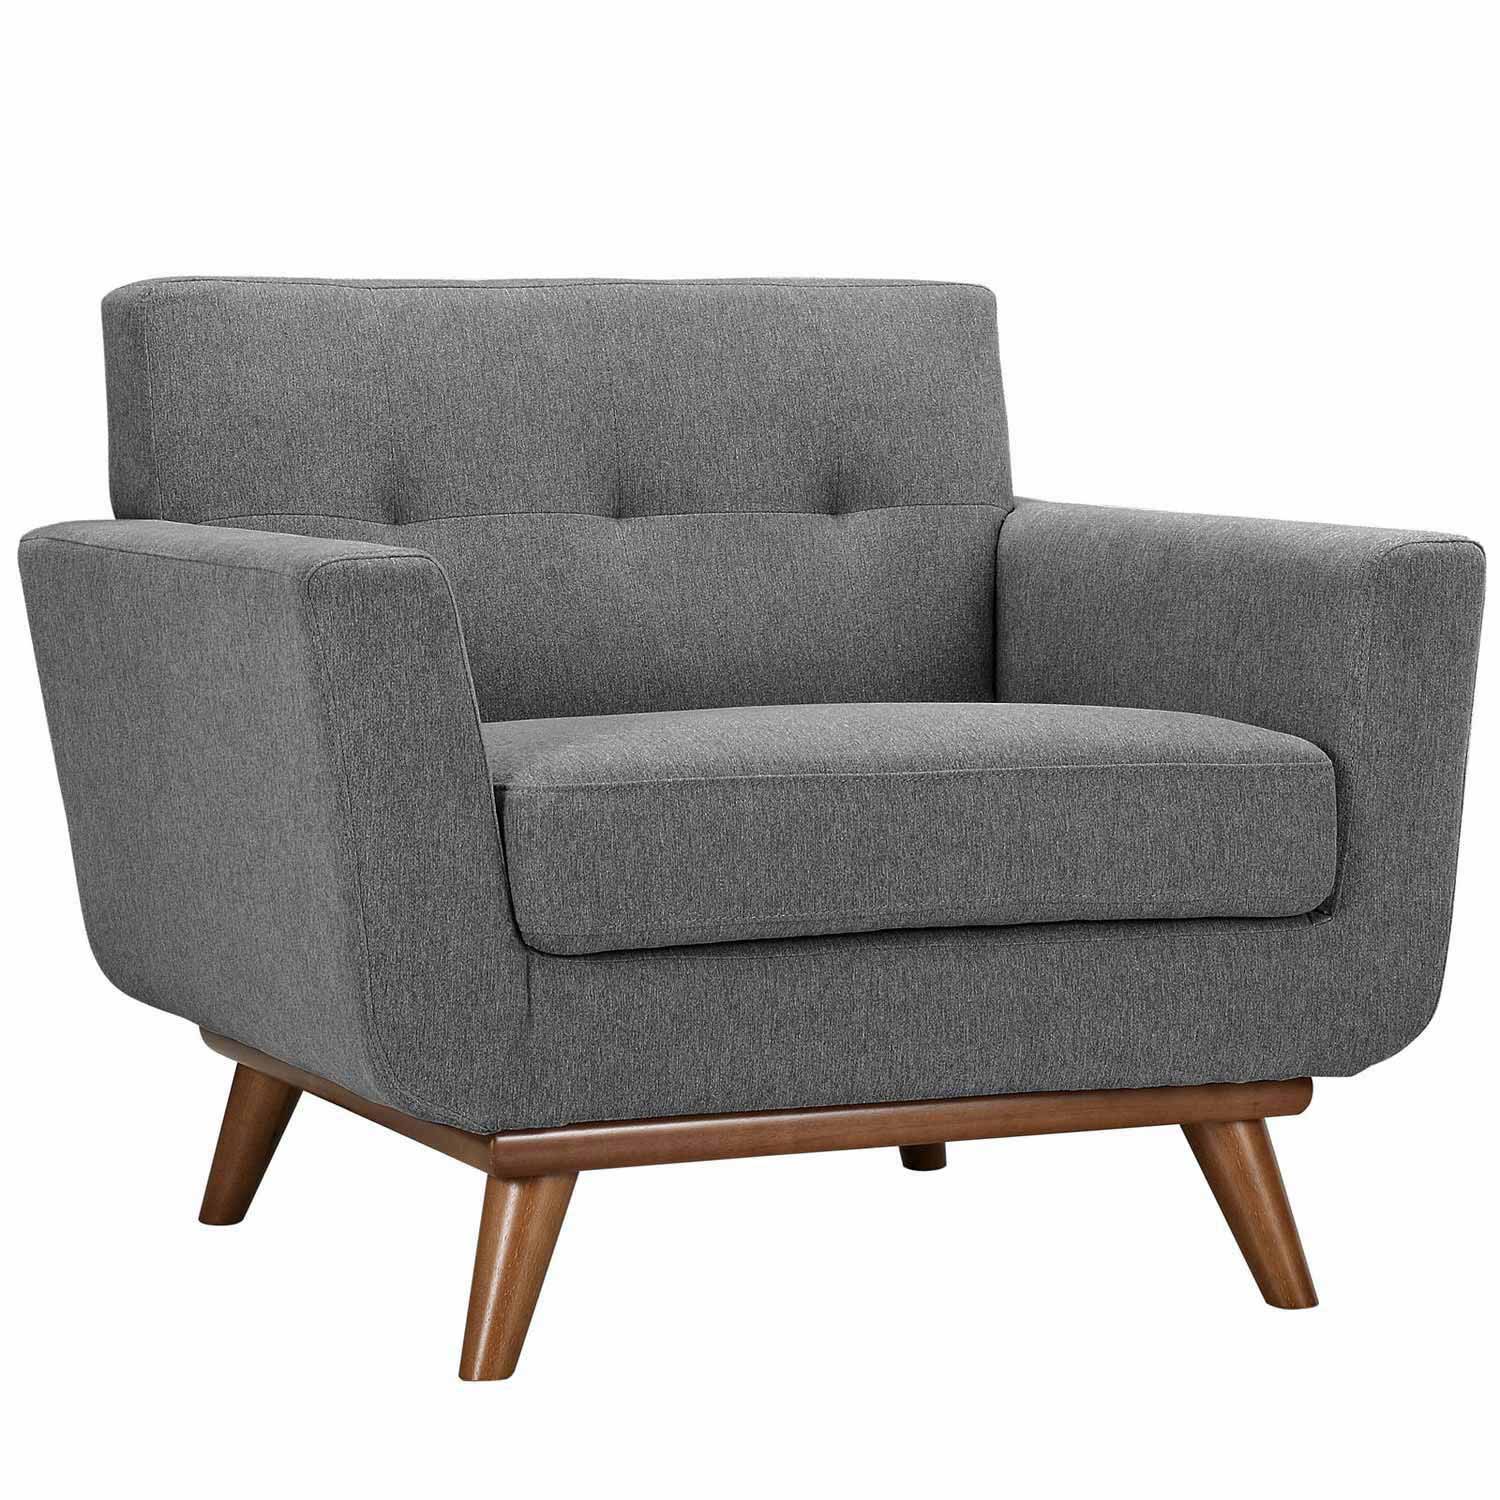 Modway Engage Armchair and Sofa Set of 2 - Gray